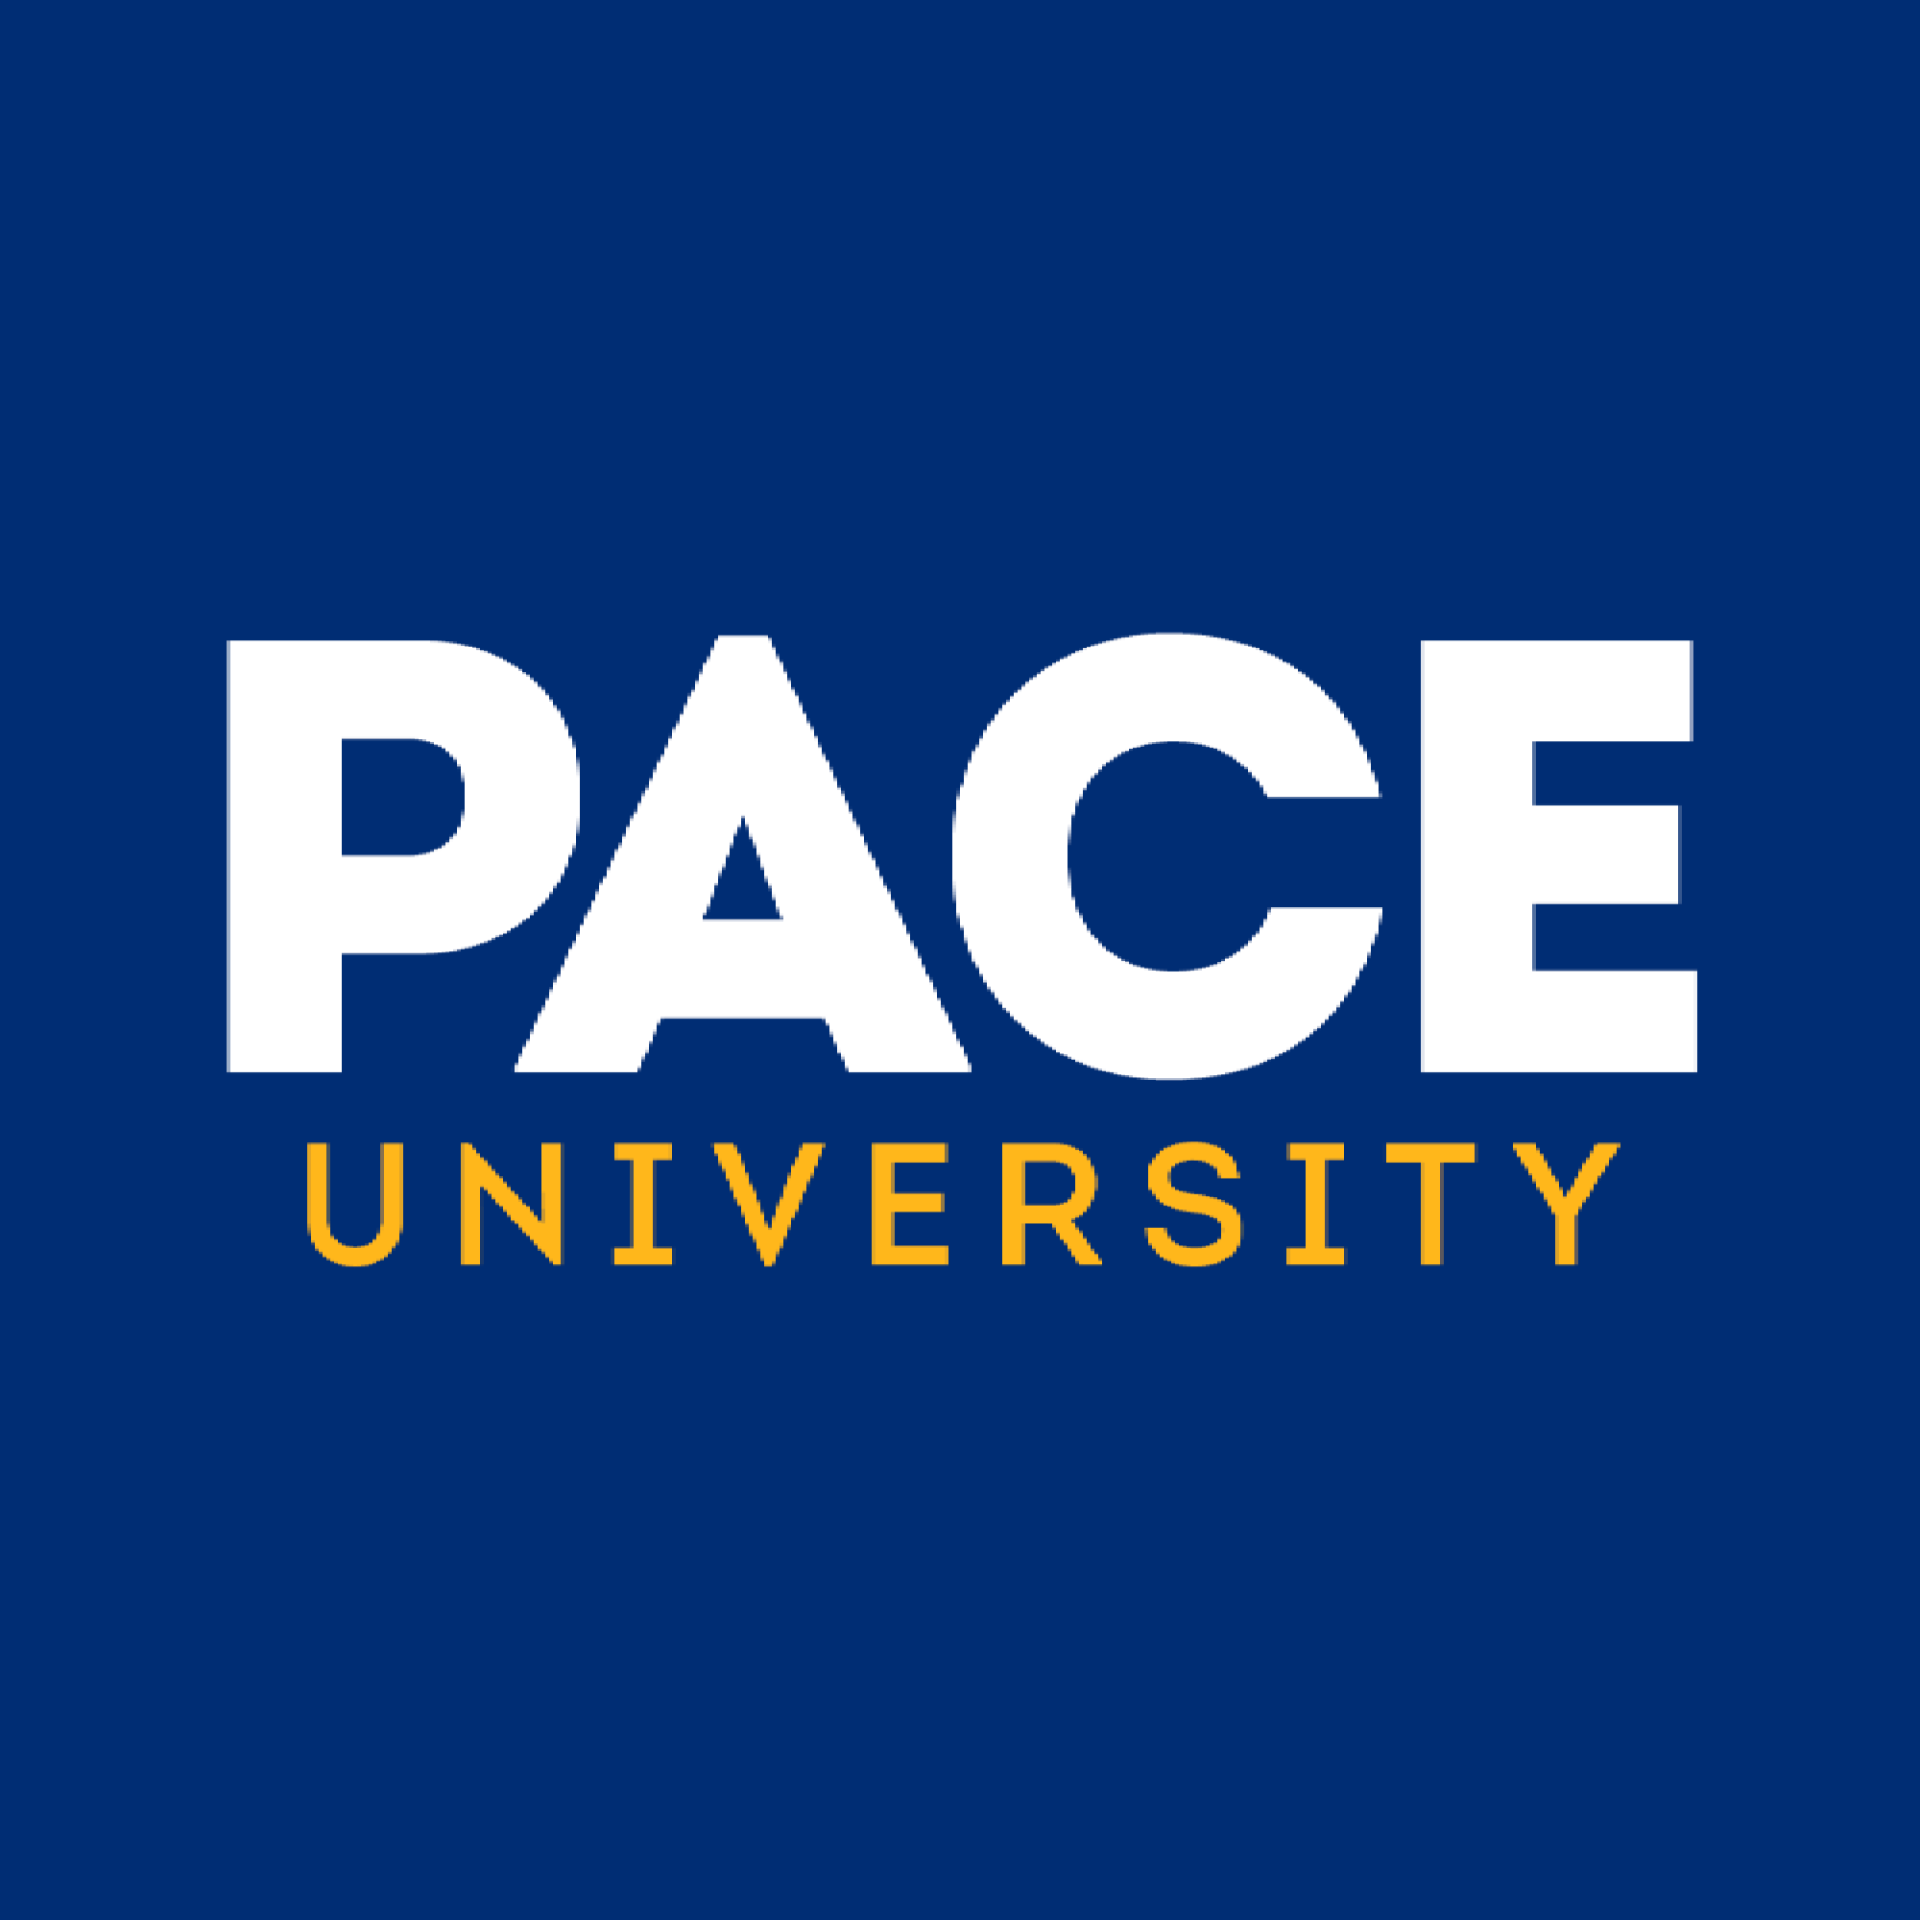 Pace University Logo, if clicked, it will take you to their website.